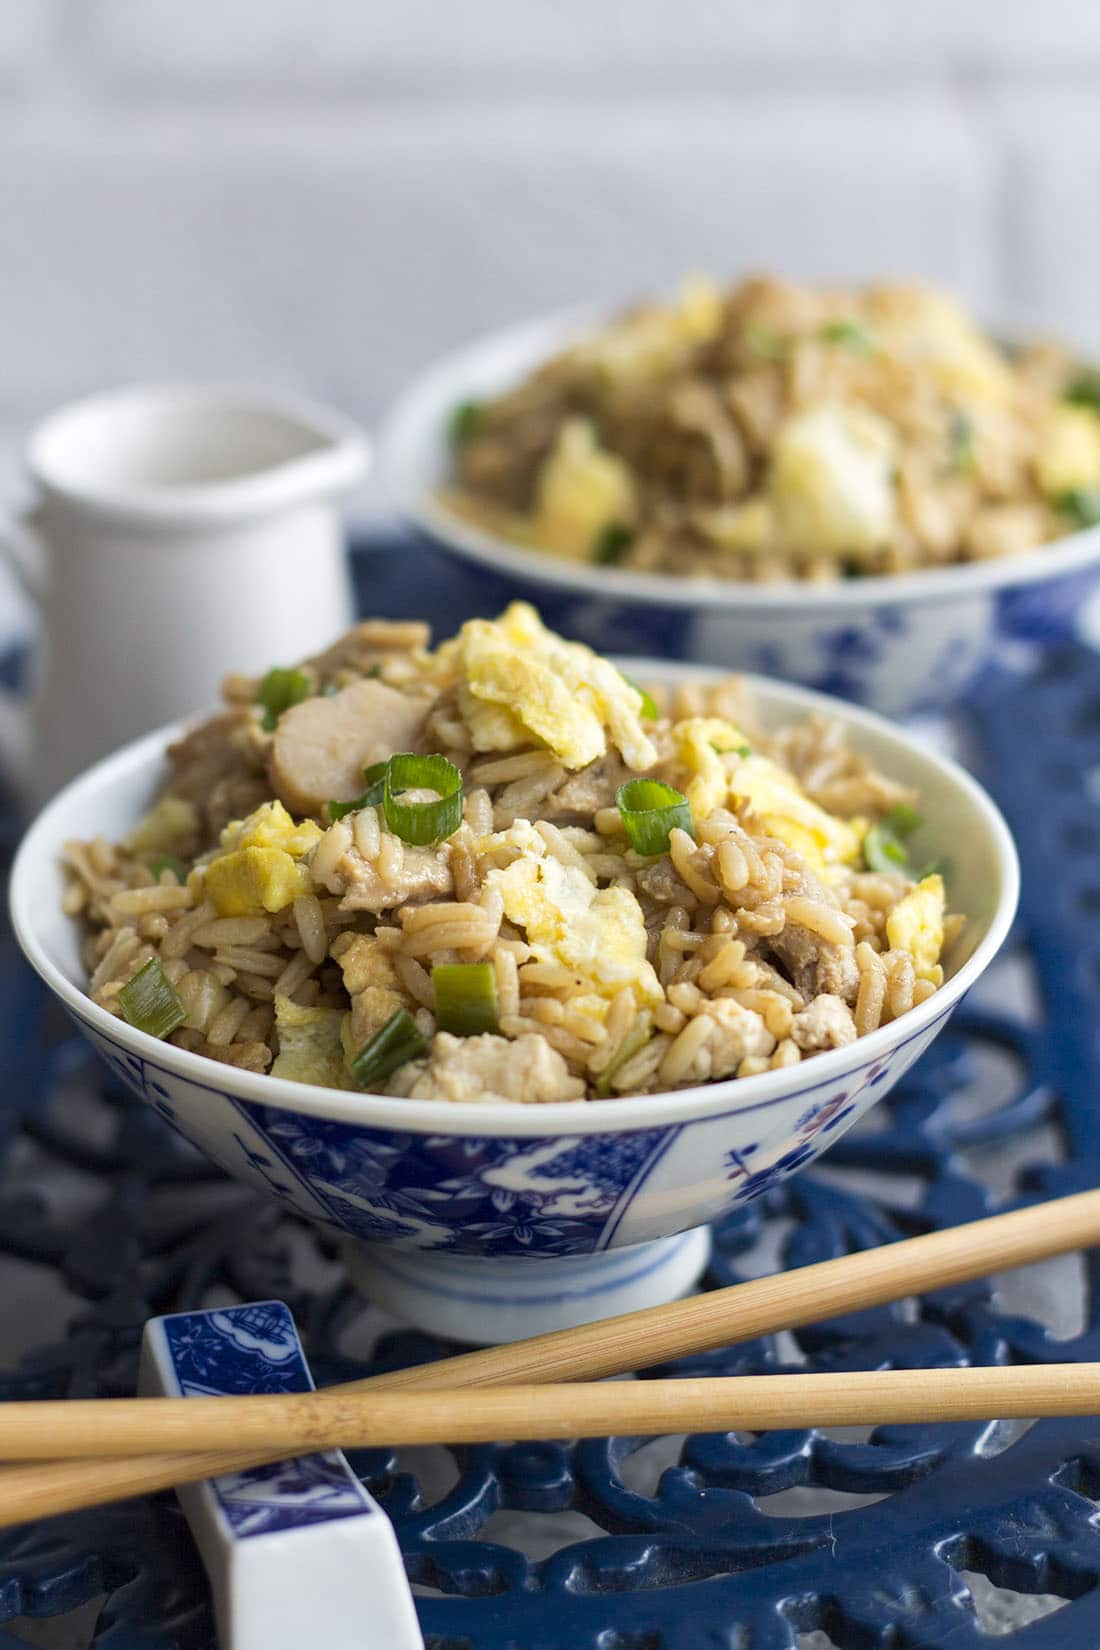 Low Calorie Fried Rice
 Low Fat Chicken Fried Rice Quick easy and packed full